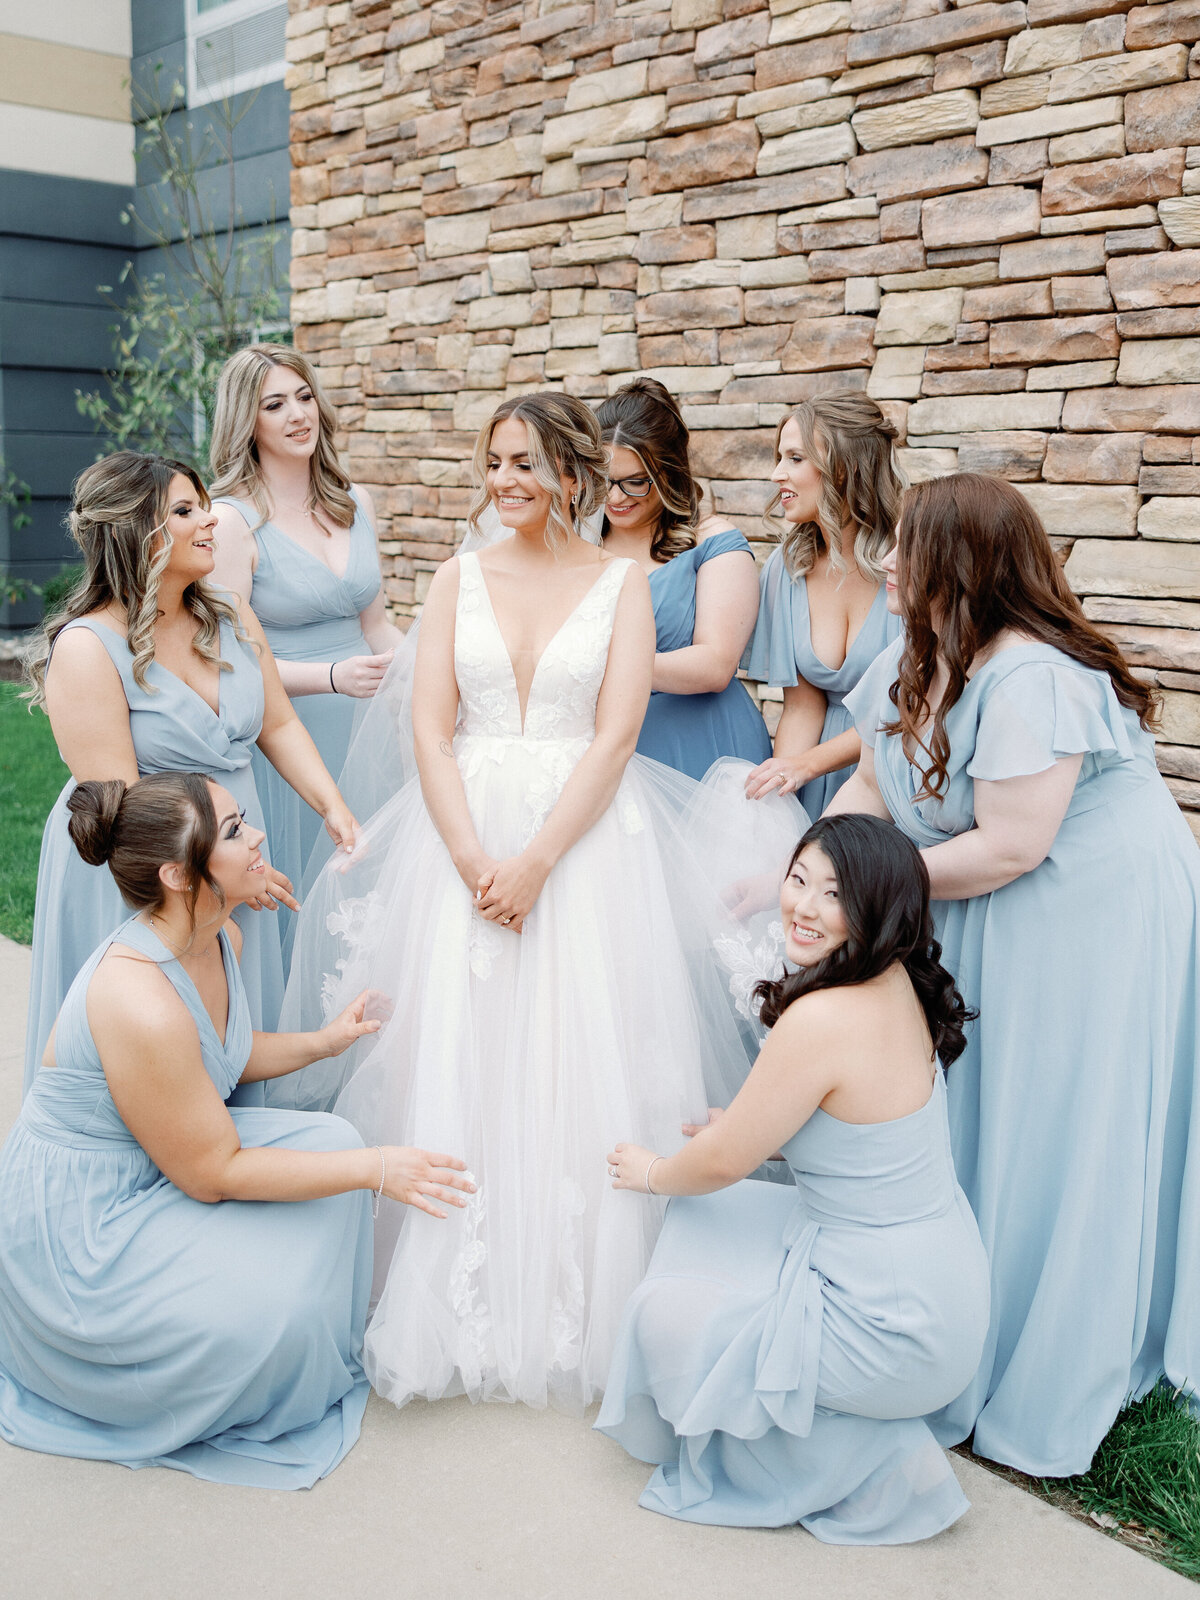 A group if bridesmaids dressed in powder blue dresses all help the bride with her finishing touches to prepare for her ceremony